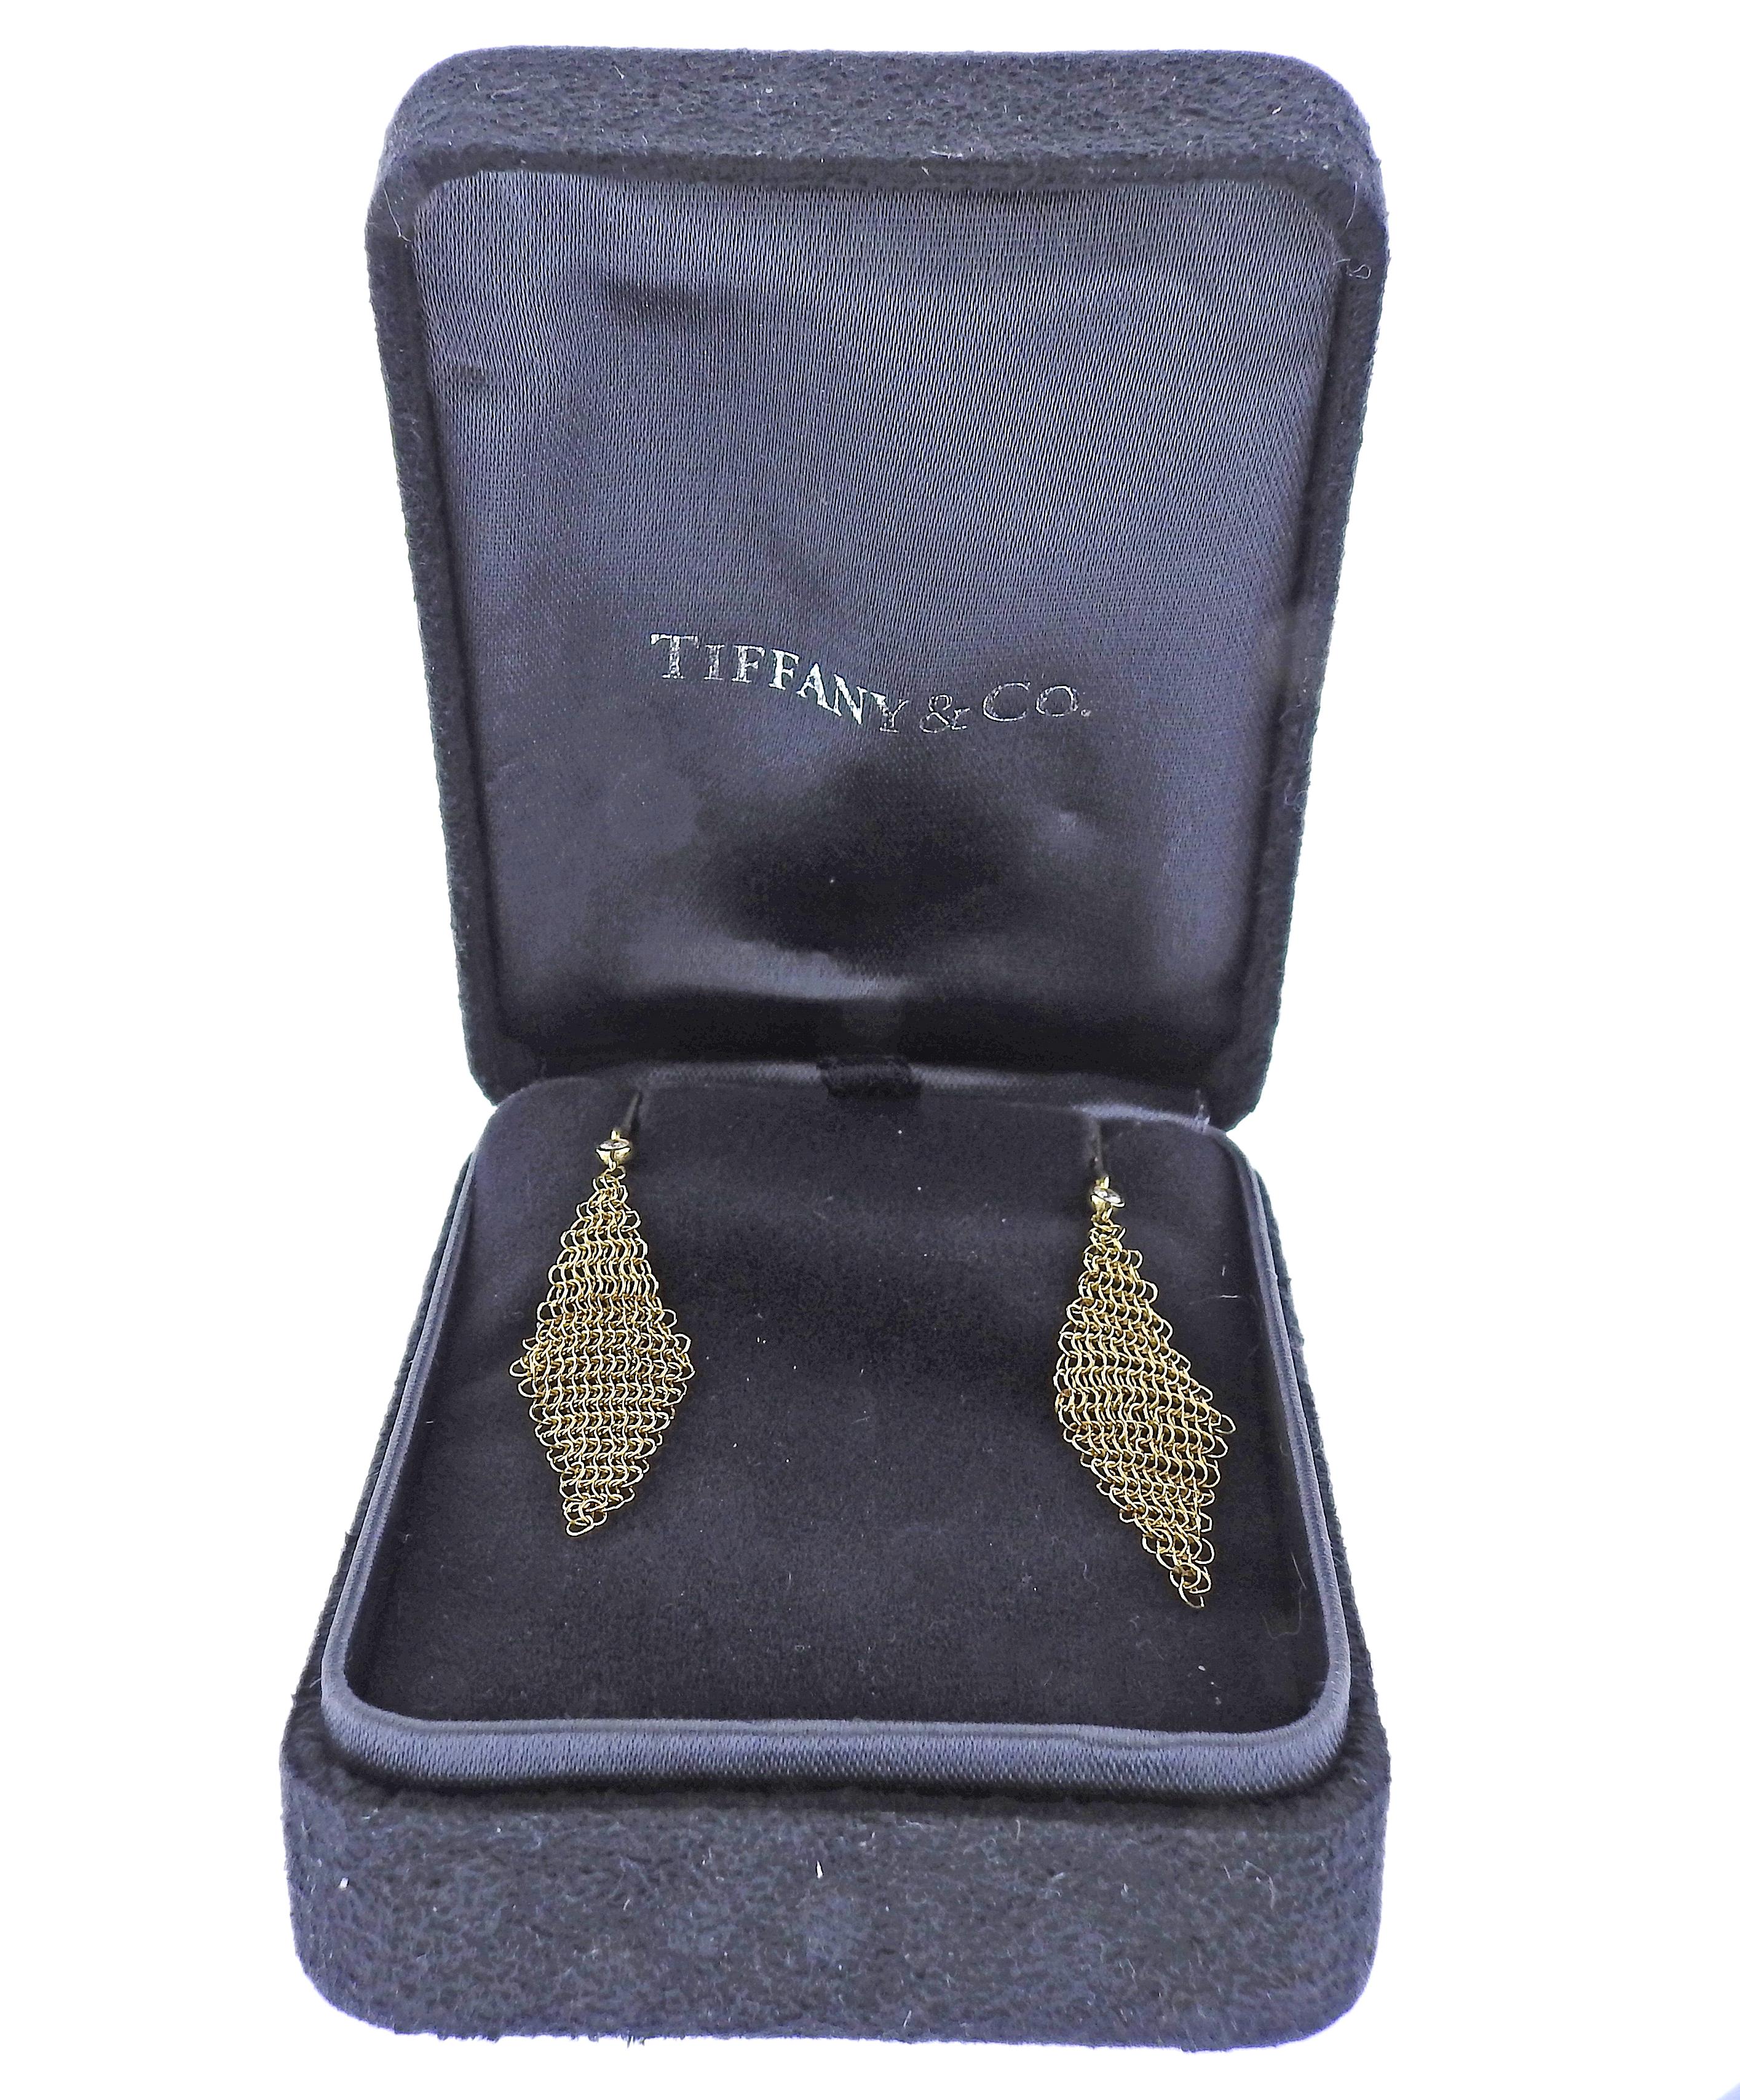 Pair of 18k gold signature mesh earrings in 18k gold, designed by Elsa Peretti for Tiffany & Co, with 1 diamond each. Earrings are 52mm long and approx. 12mm wide. Marked: T & Co, 750. Come in original box. Weight - 1.8 grams.